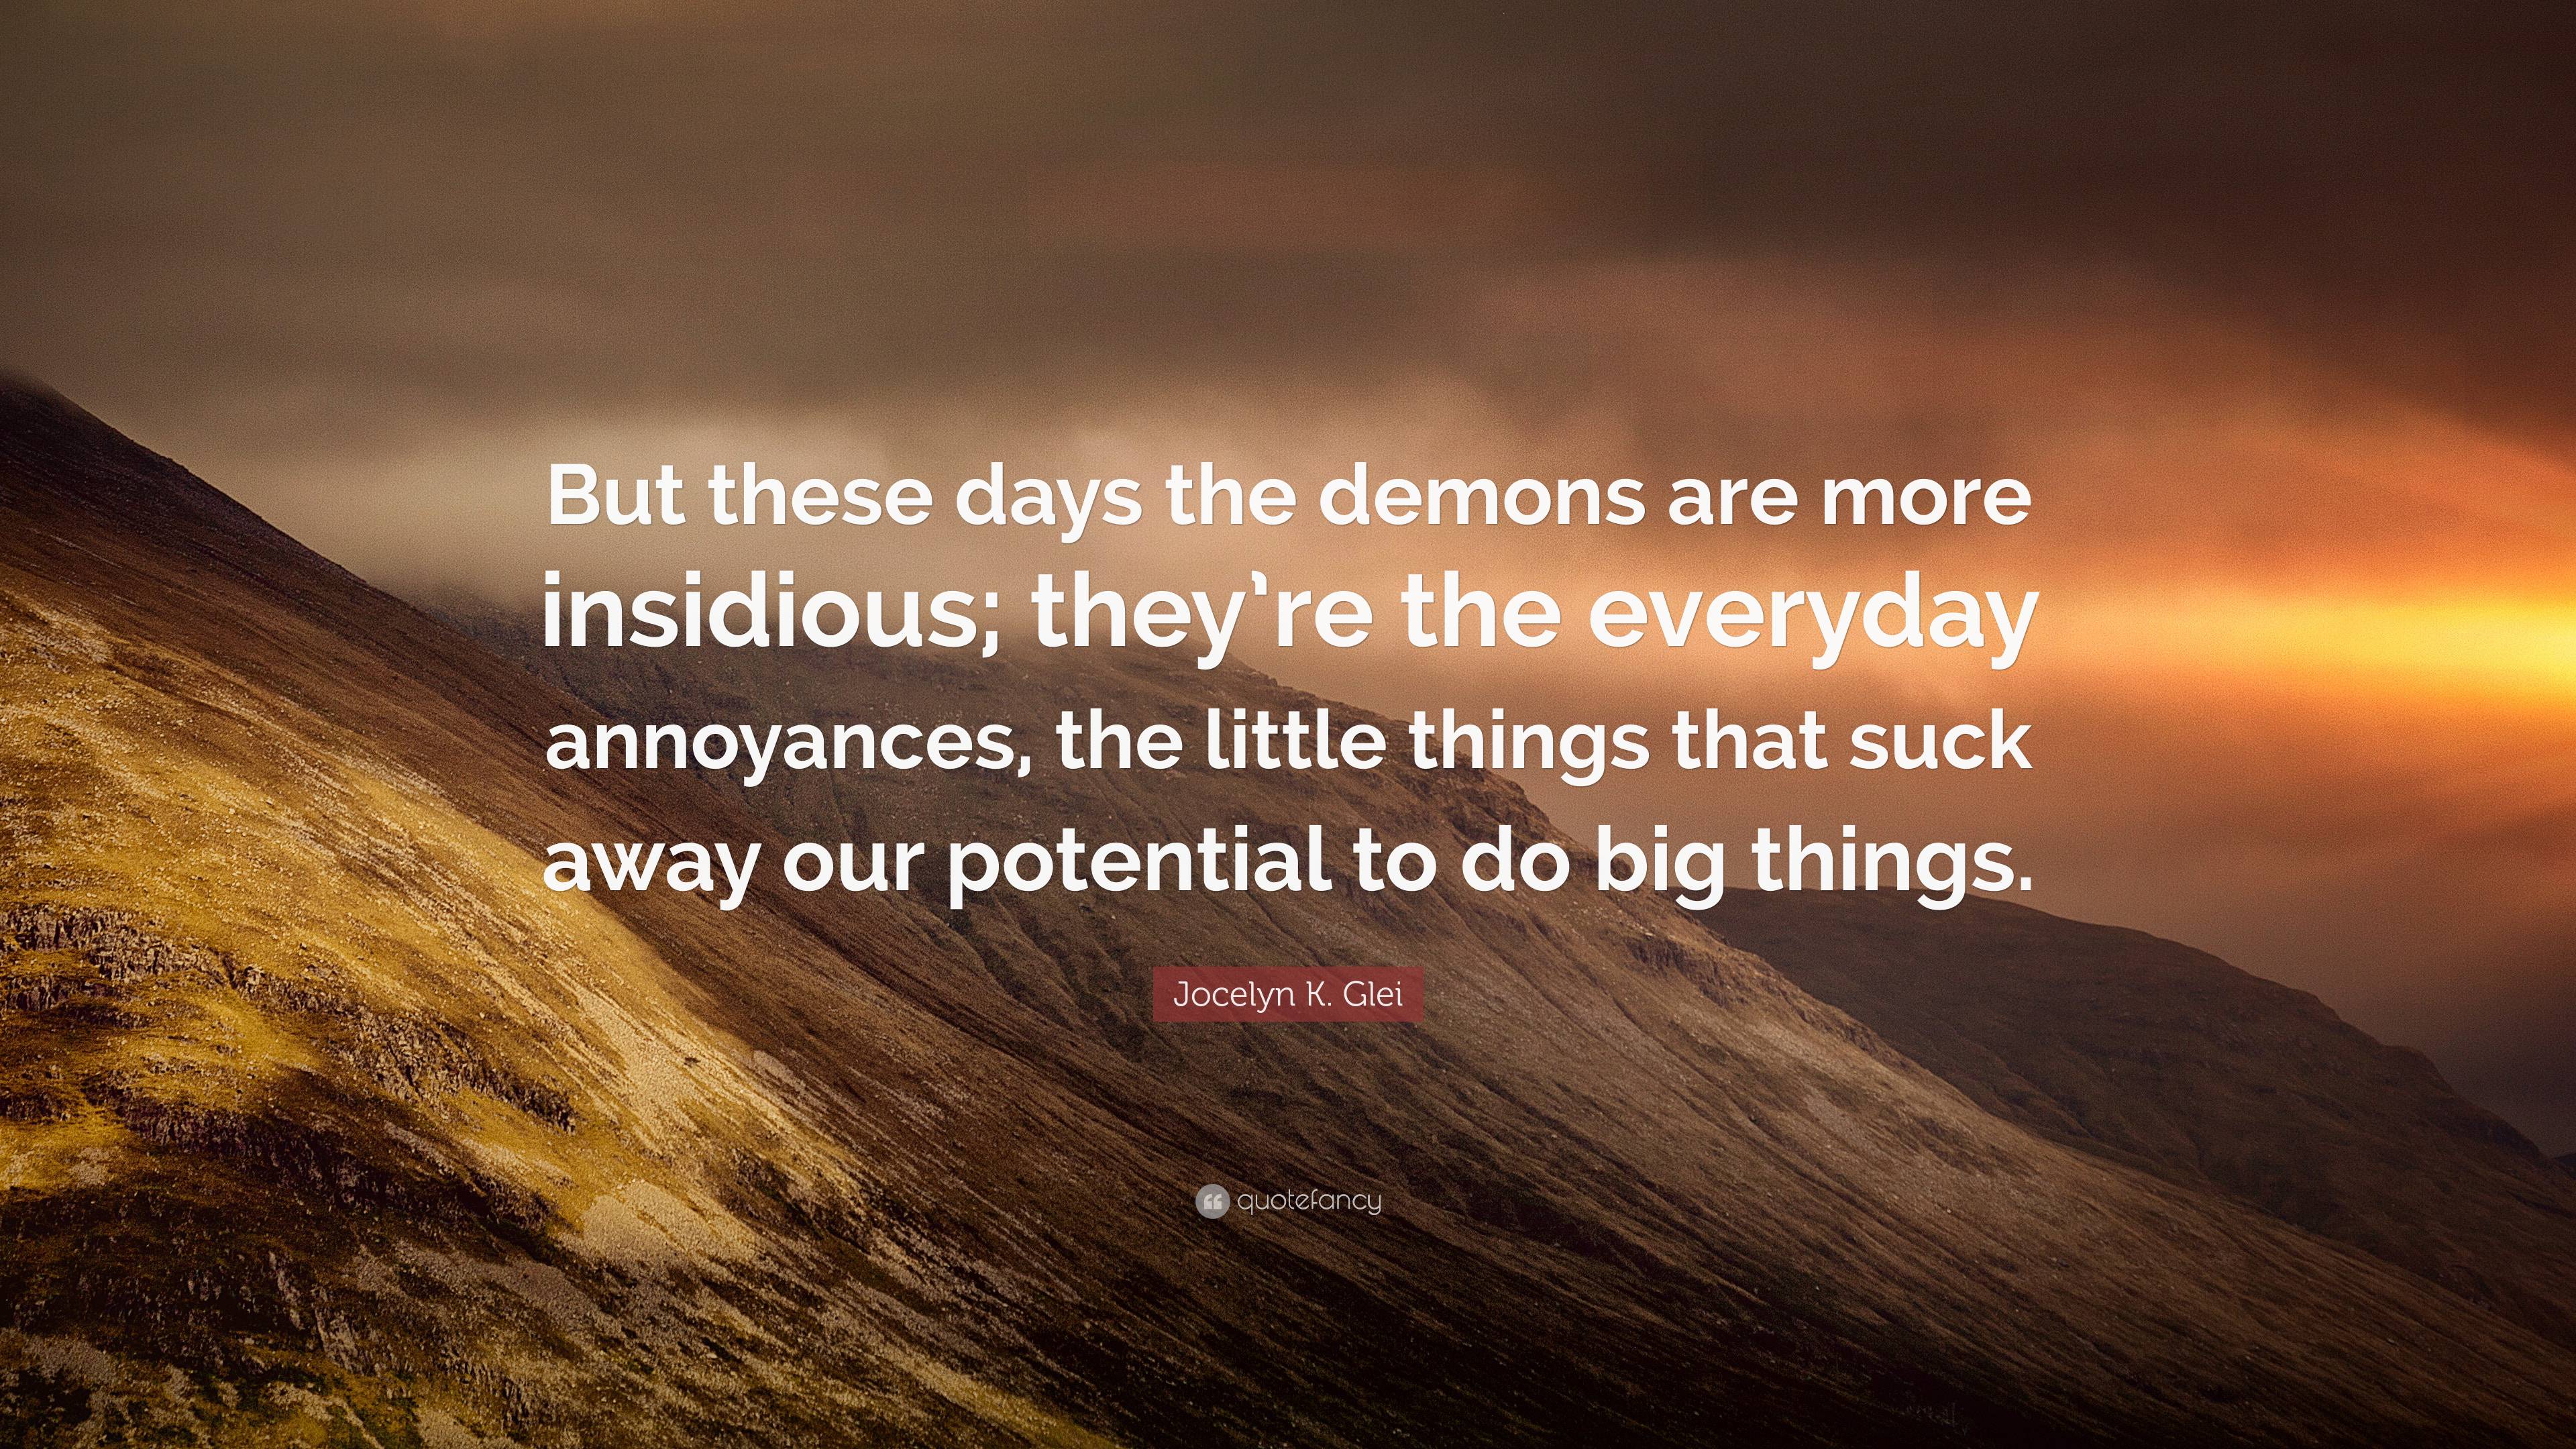 Jocelyn K. Glei Quote: “But these days the demons are more insidious ...